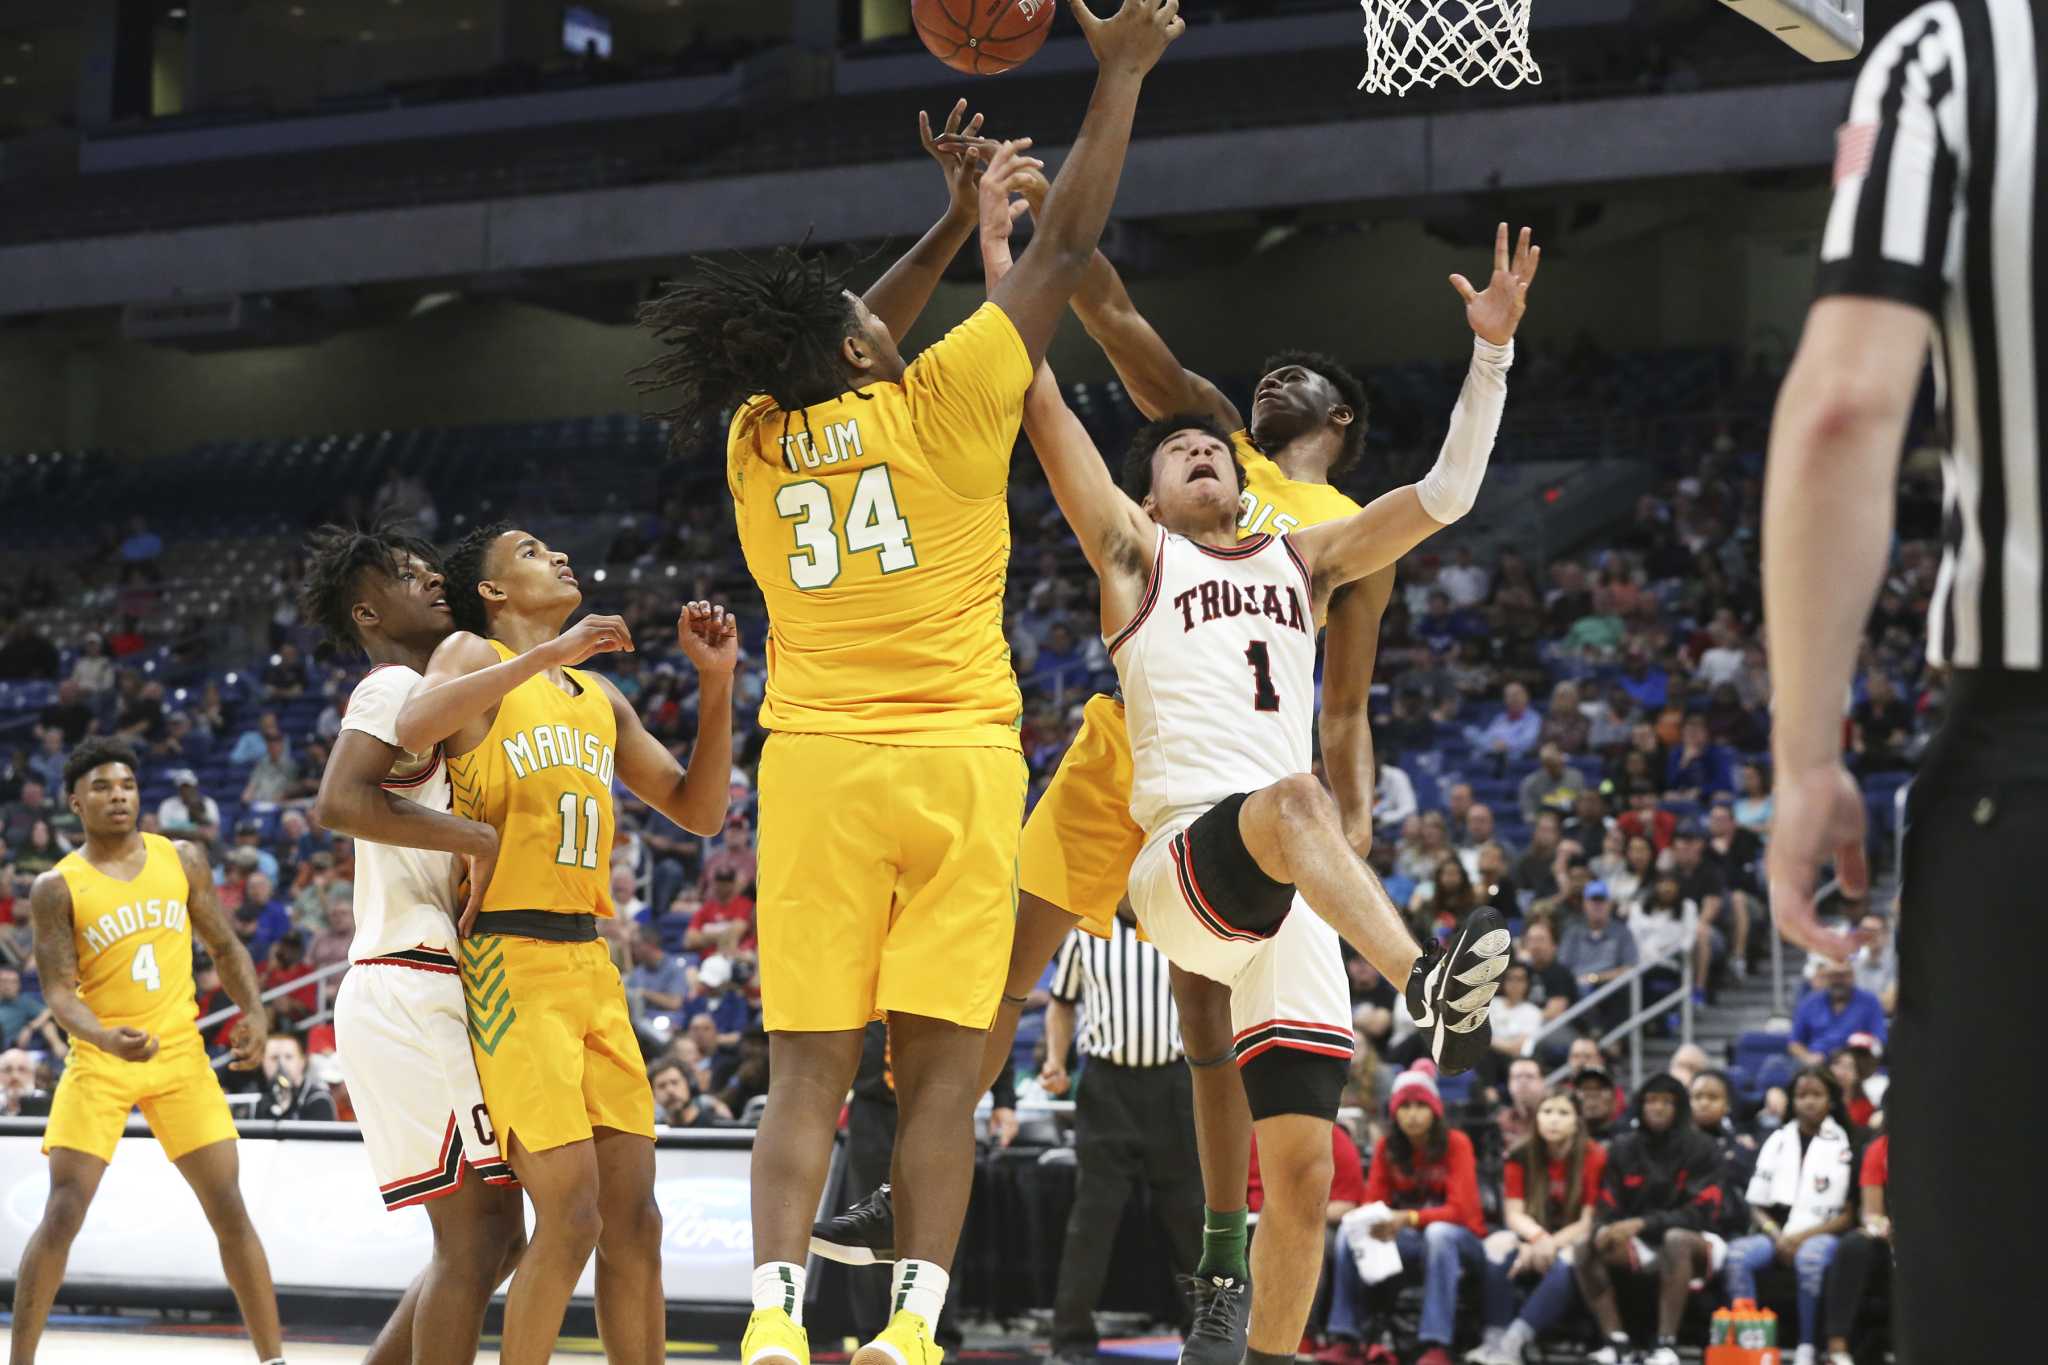 Dallas Madison runs past Coldspring in 3A state semifinal